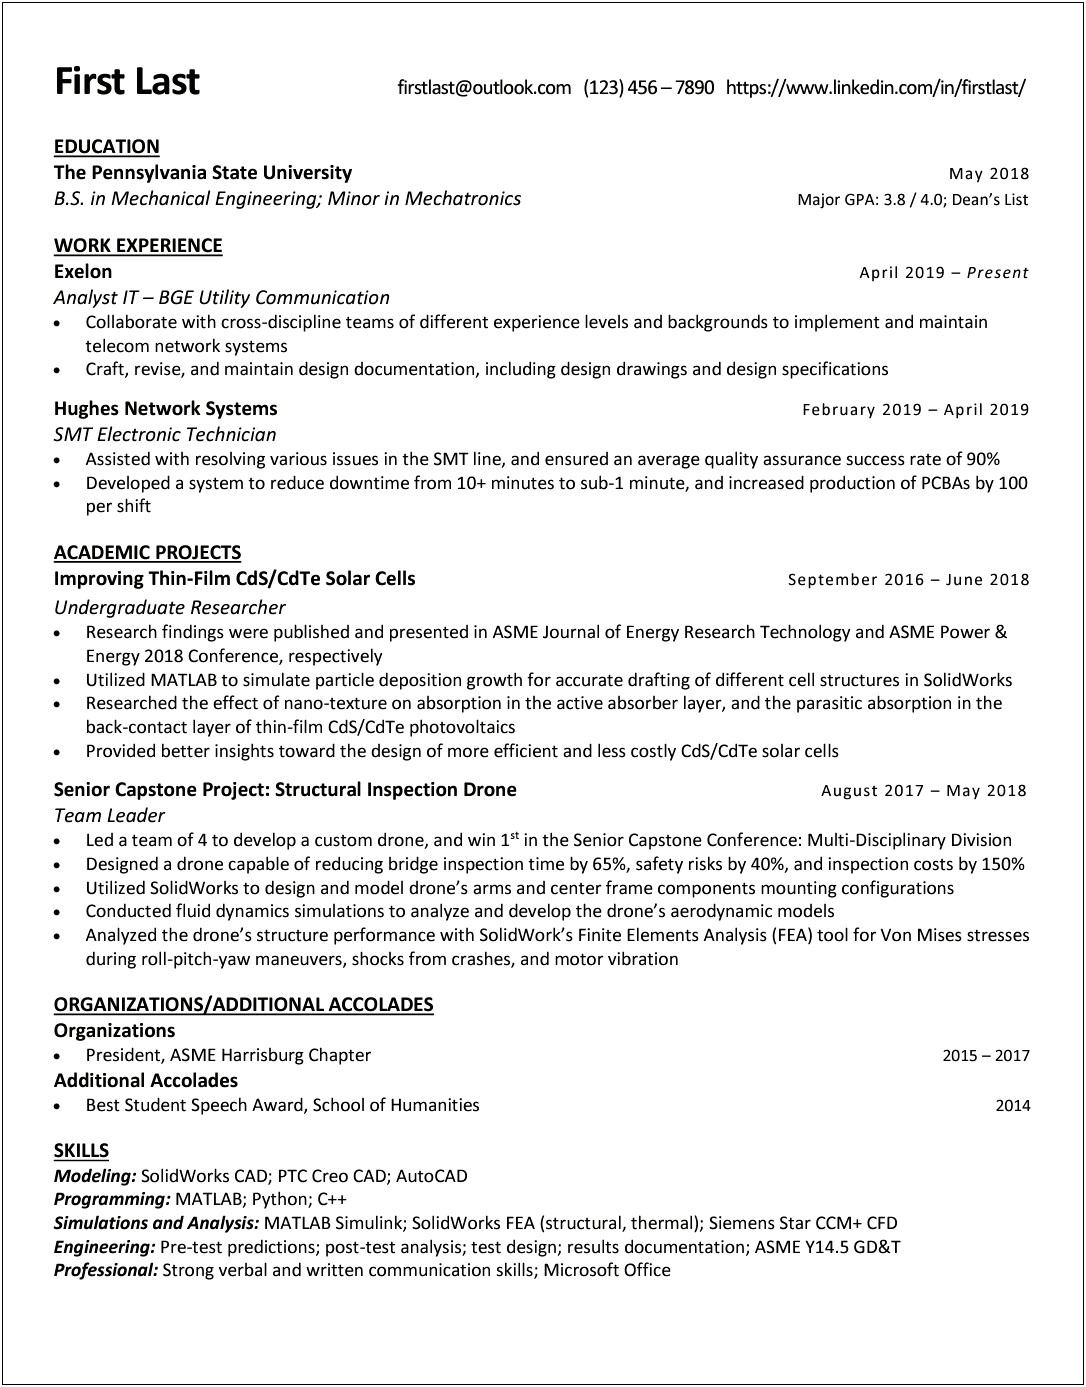 No Experience Resume Reddit For Networking